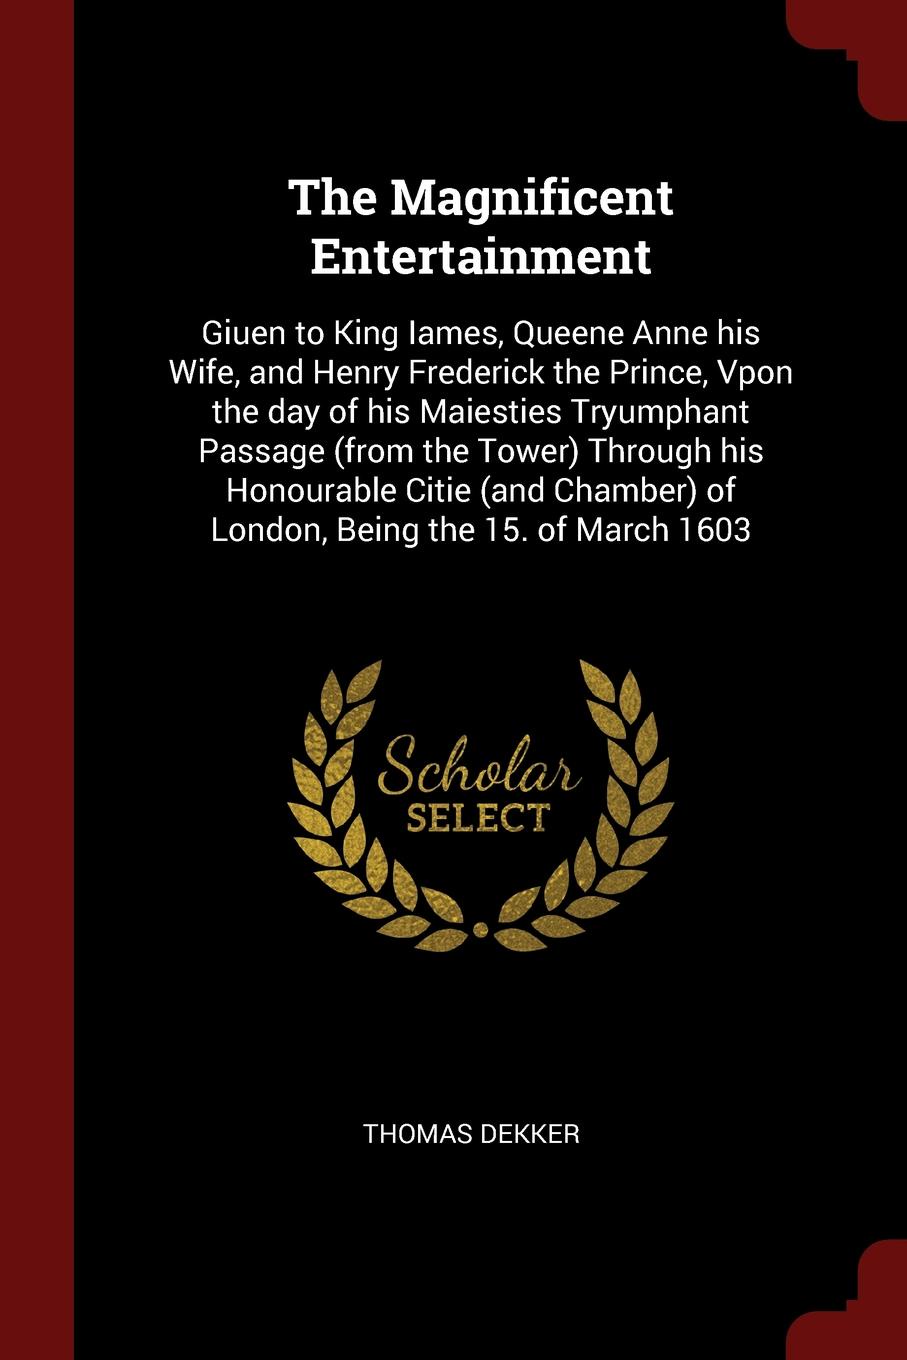 The Magnificent Entertainment. Giuen to King Iames, Queene Anne his Wife, and Henry Frederick the Prince, Vpon the day of his Maiesties Tryumphant Passage (from the Tower) Through his Honourable Citie (and Chamber) of London, Being the 15. of Marc...